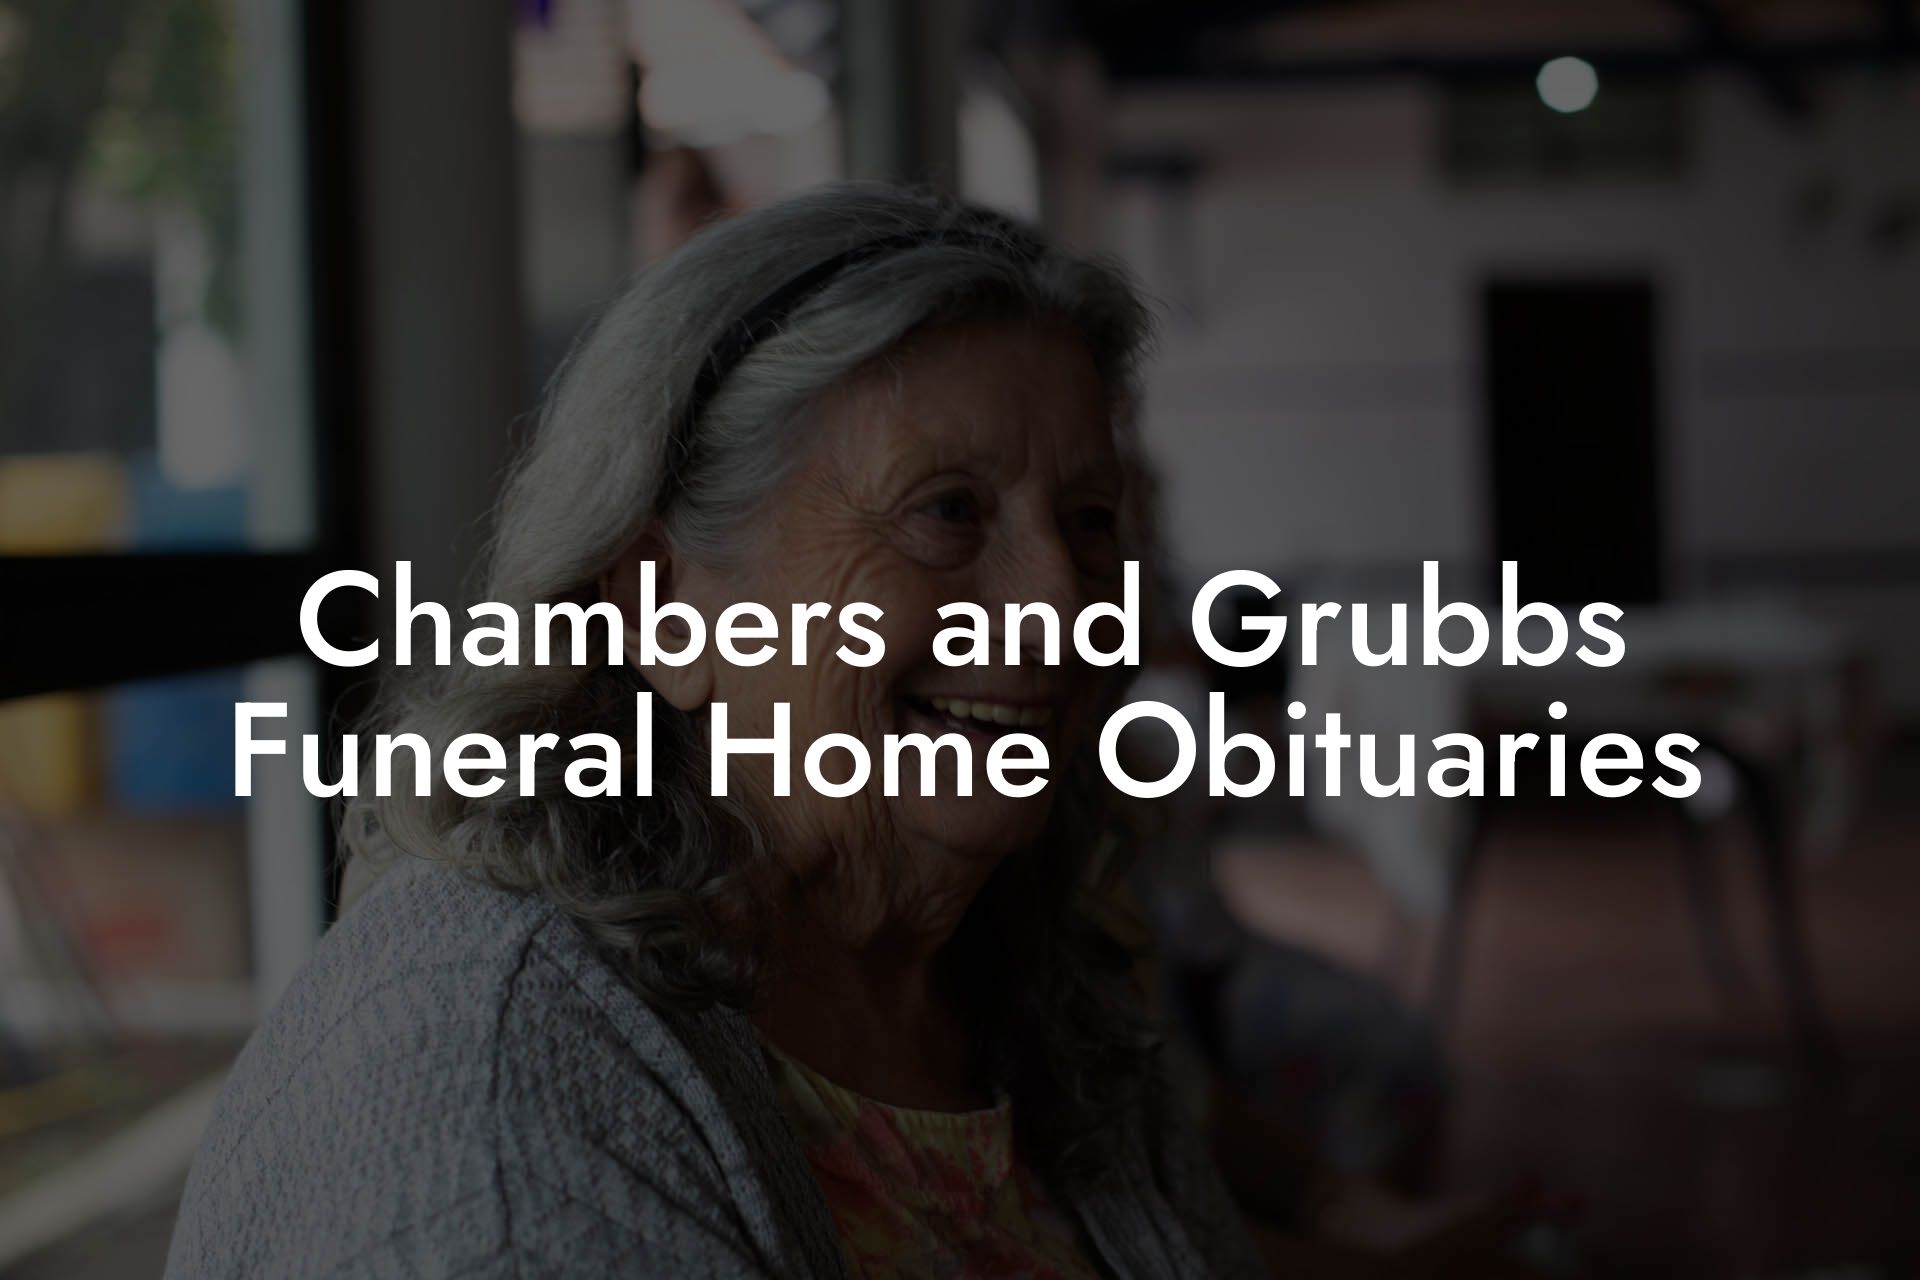 Chambers and Grubbs Funeral Home Obituaries